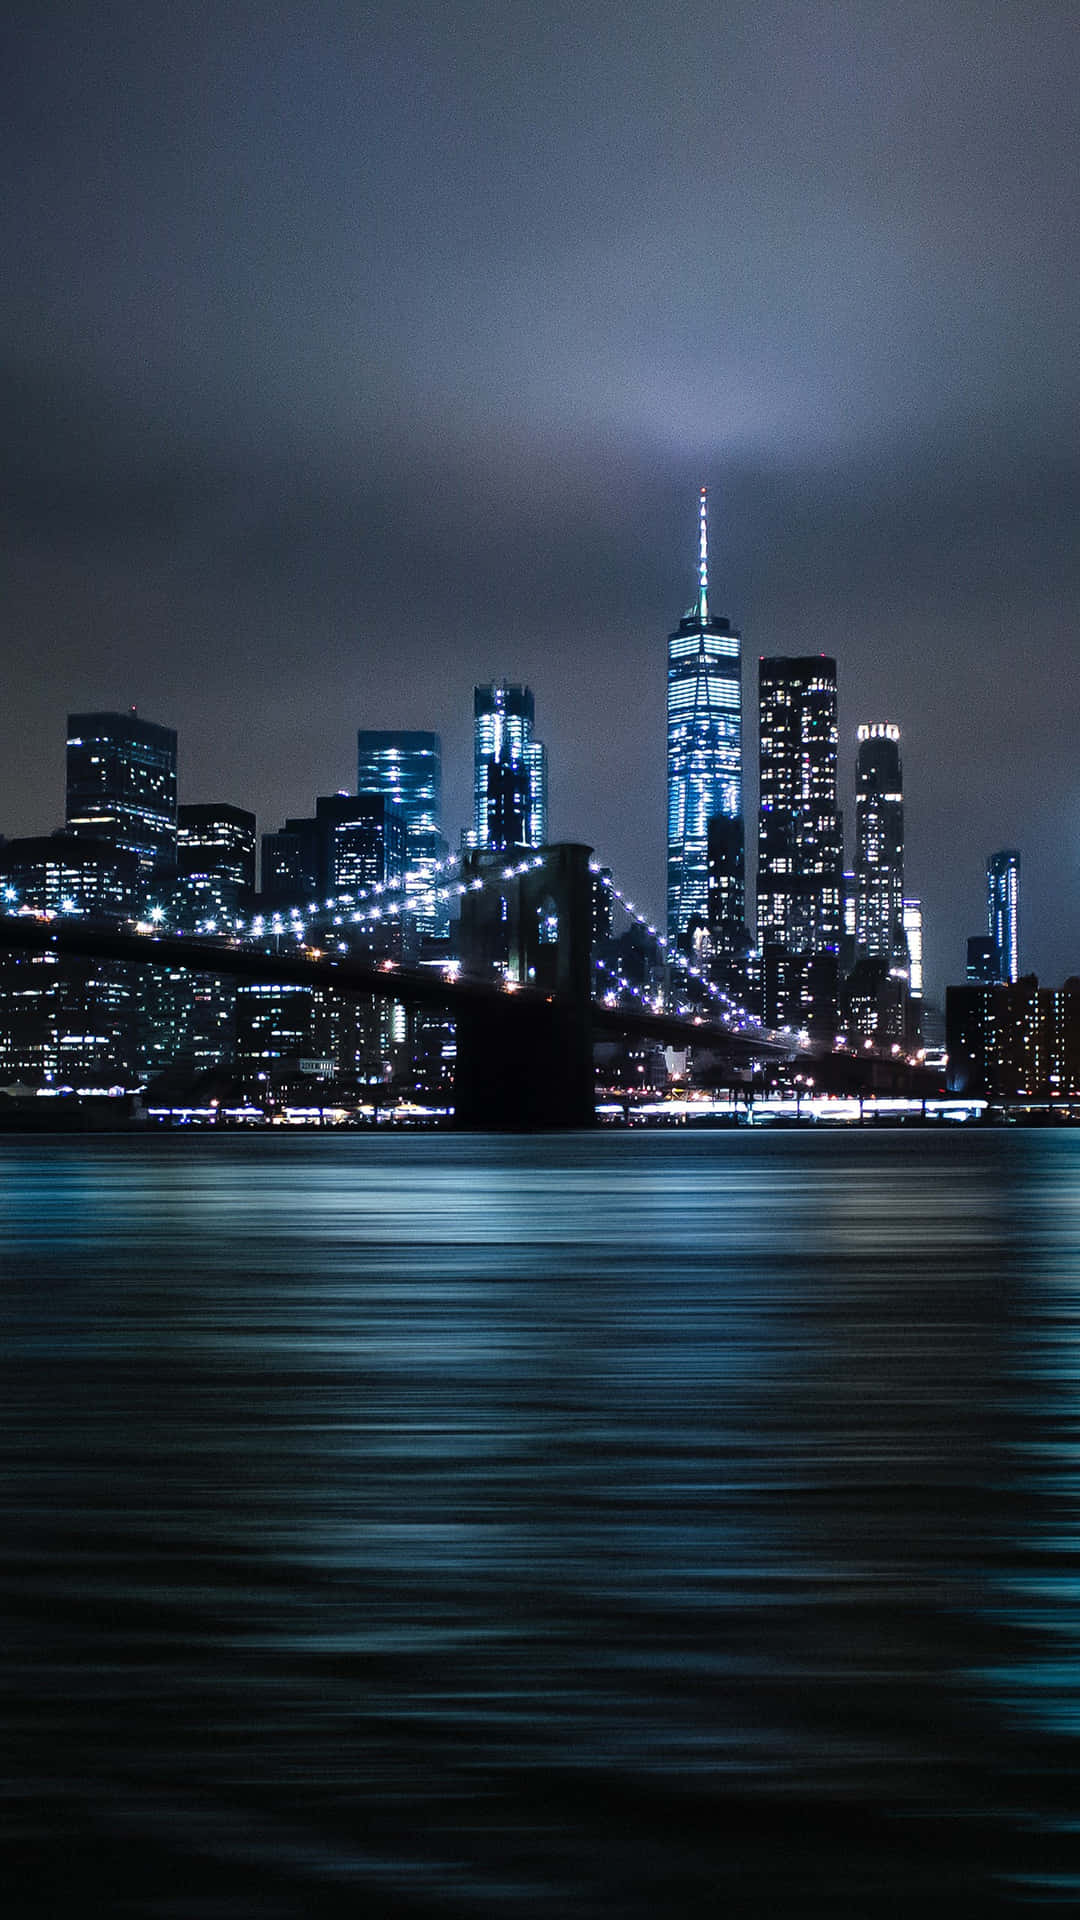 Take a stroll through the vibrant and bustling streets of New York City at night. Wallpaper